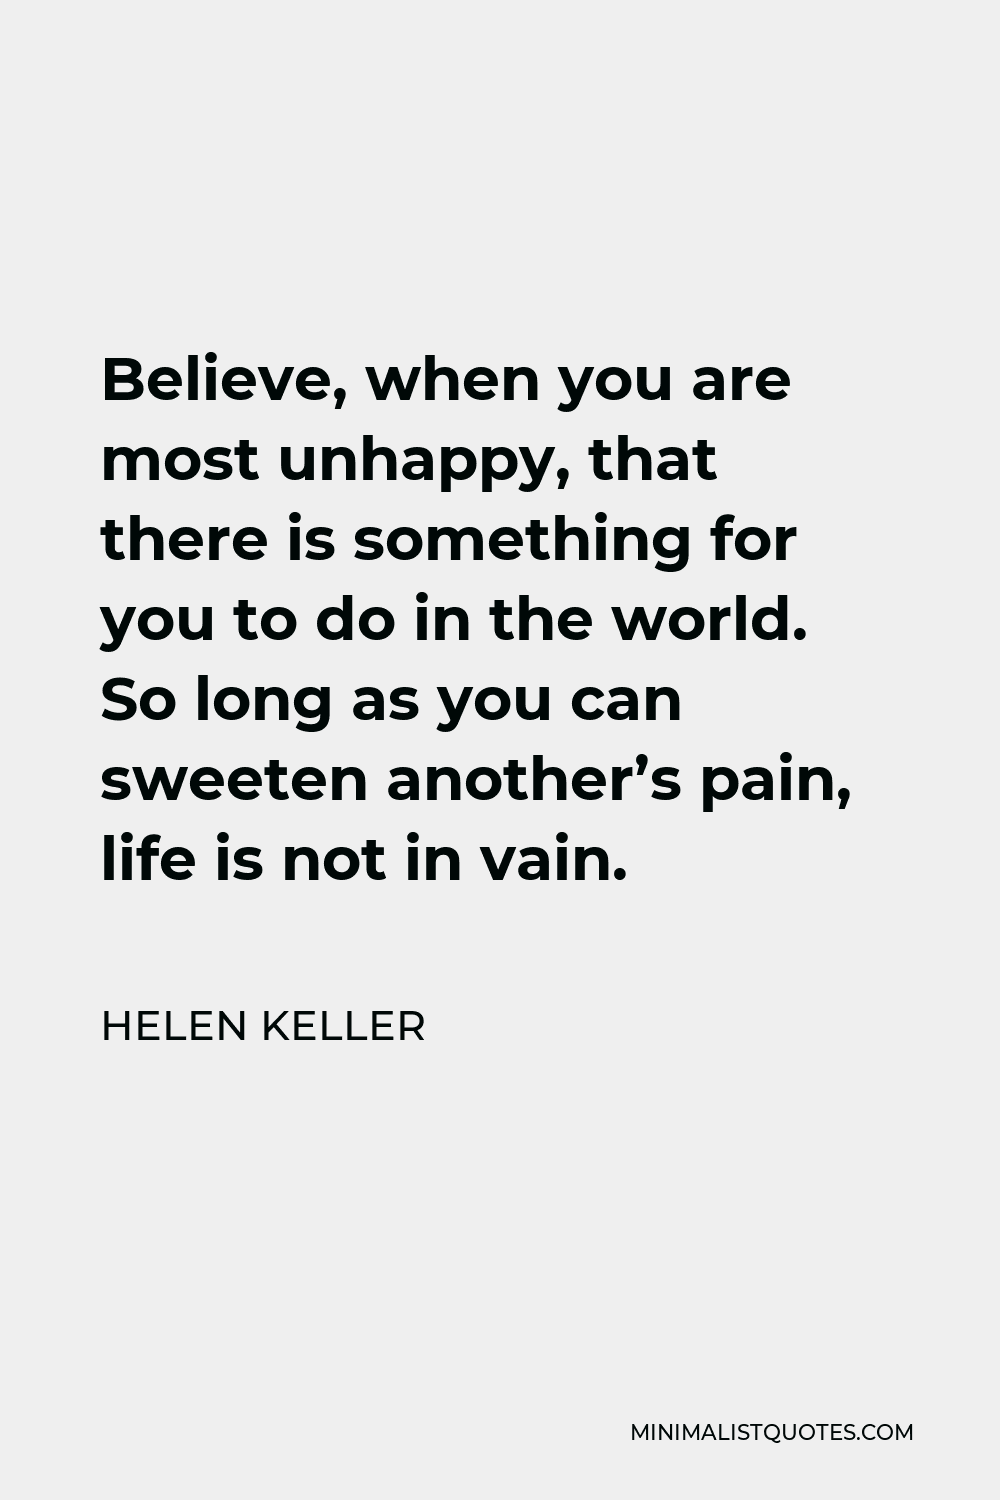 Helen Keller Quote - Believe, when you are most unhappy, that there is something for you to do in the world. So long as you can sweeten another’s pain, life is not in vain.